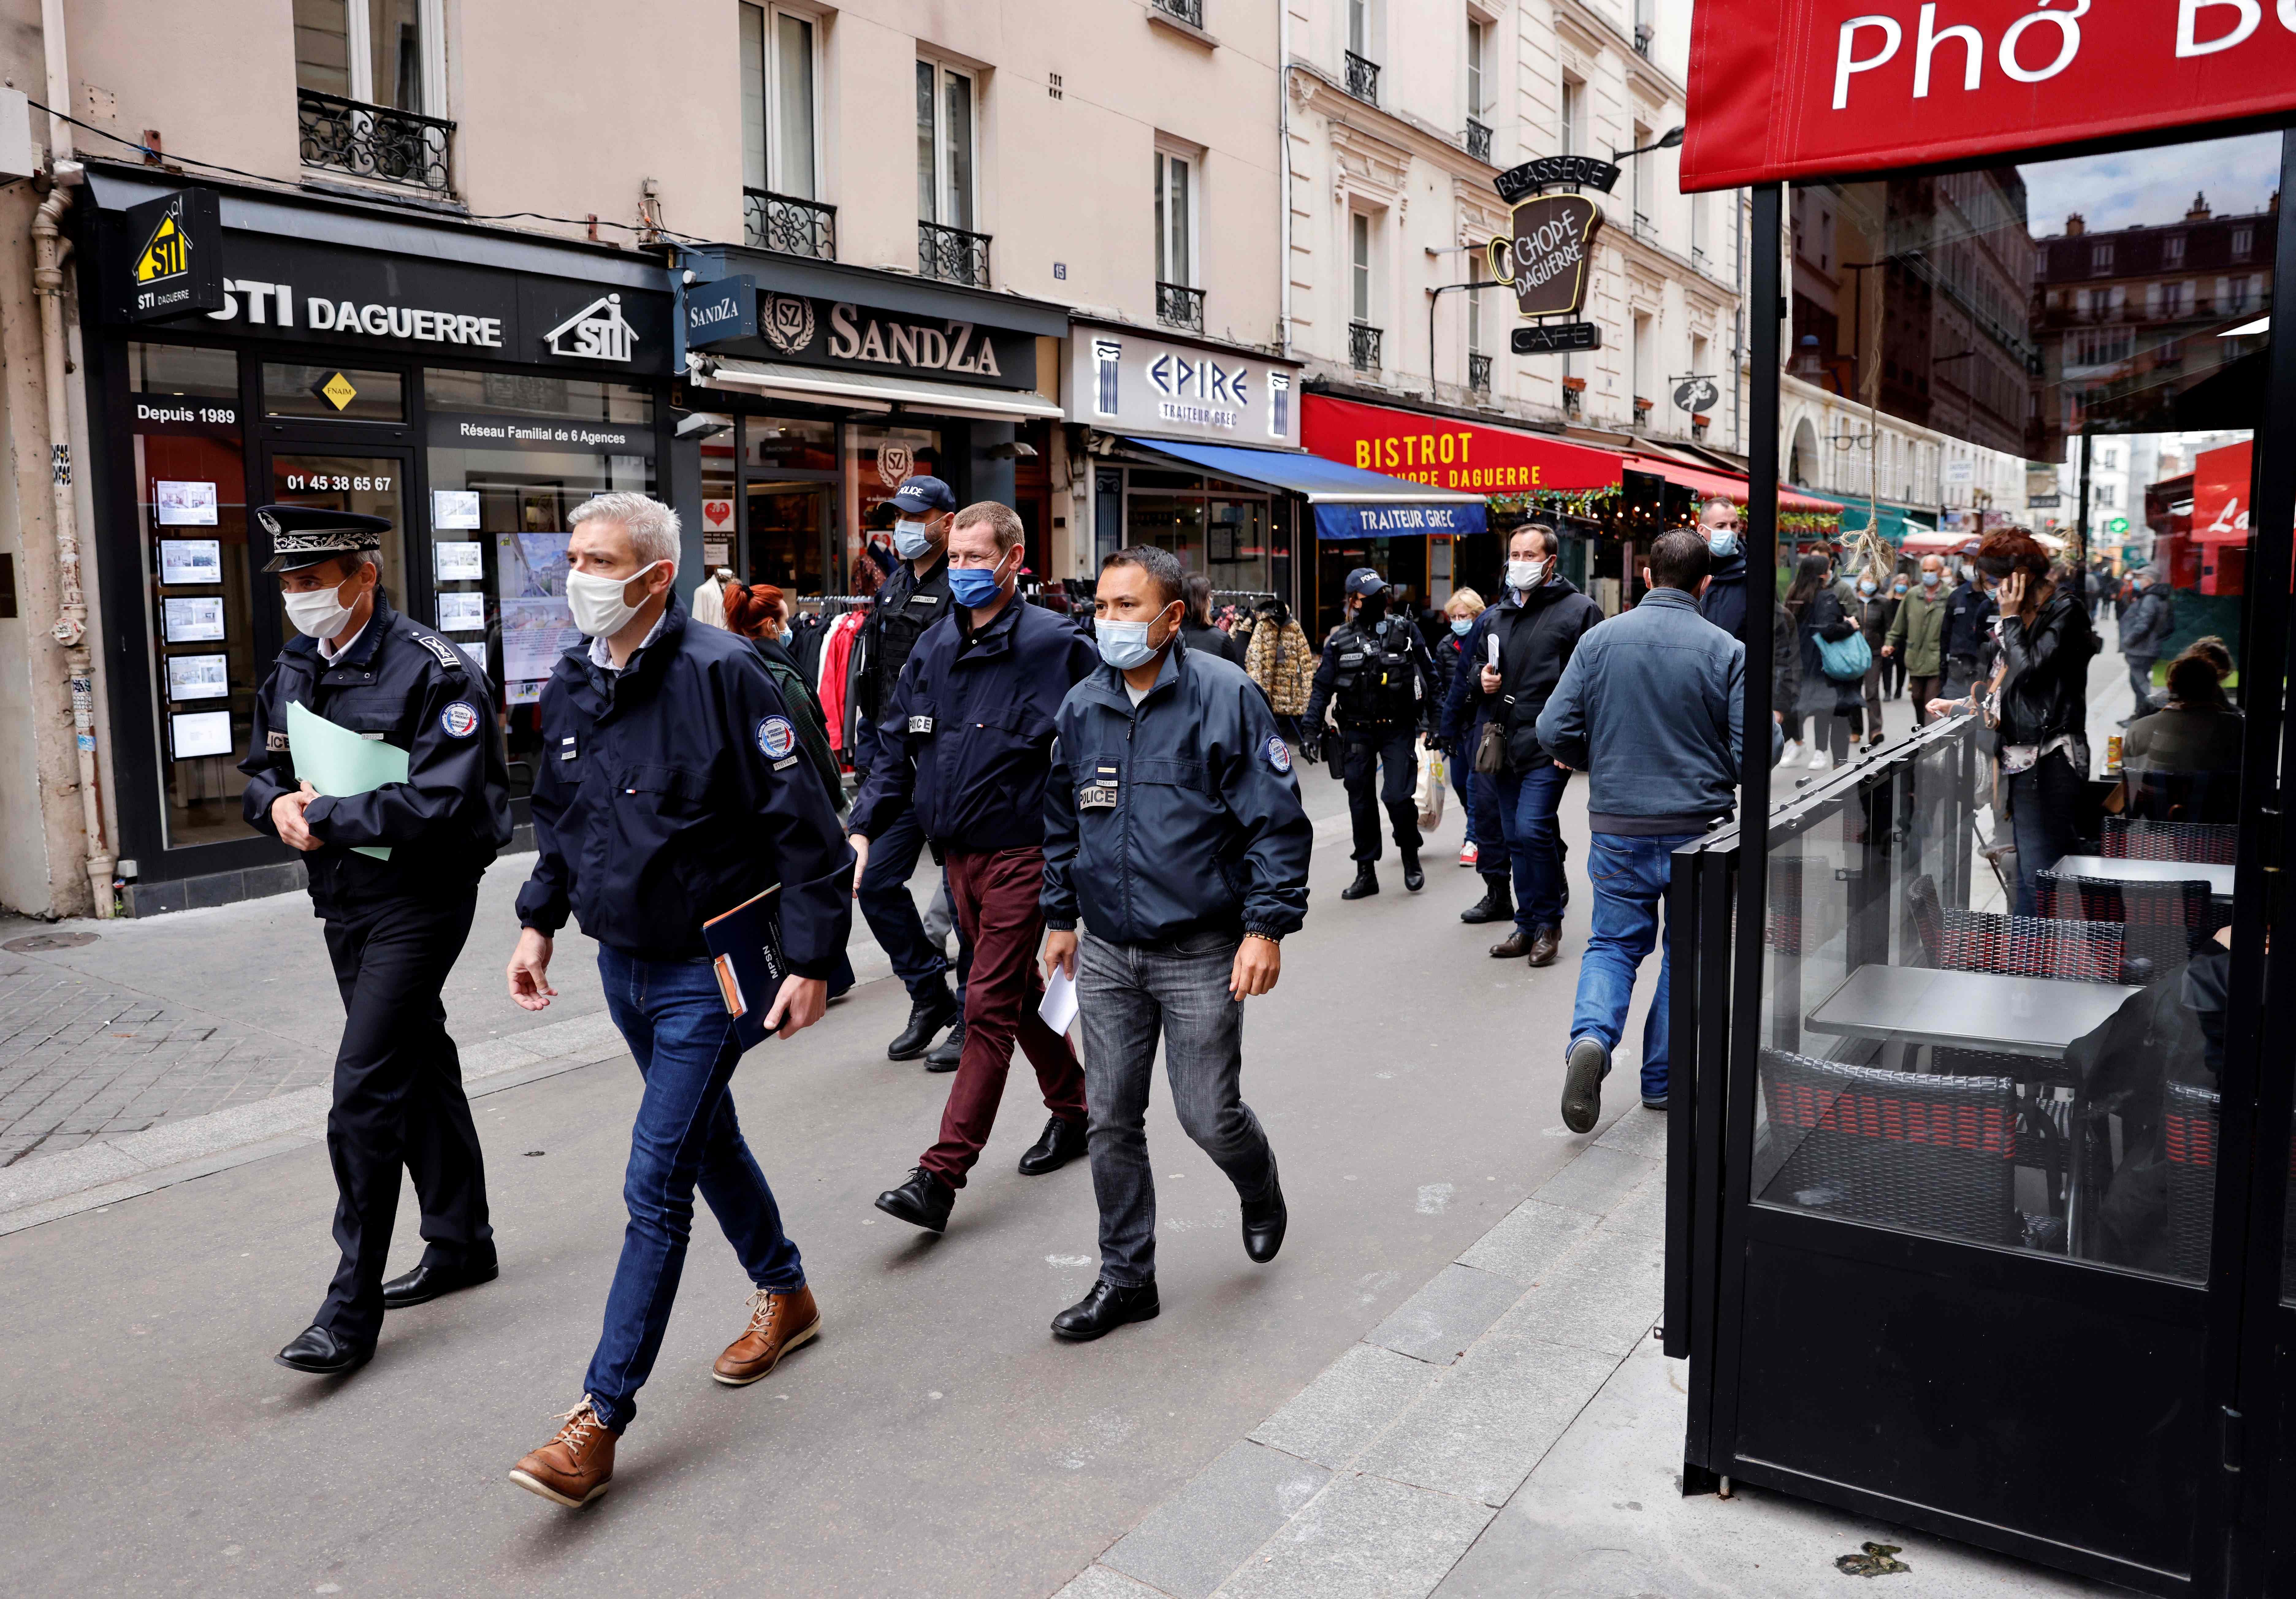 Police officers walk in a street with restaurants in Paris. Credits: AFP Photo